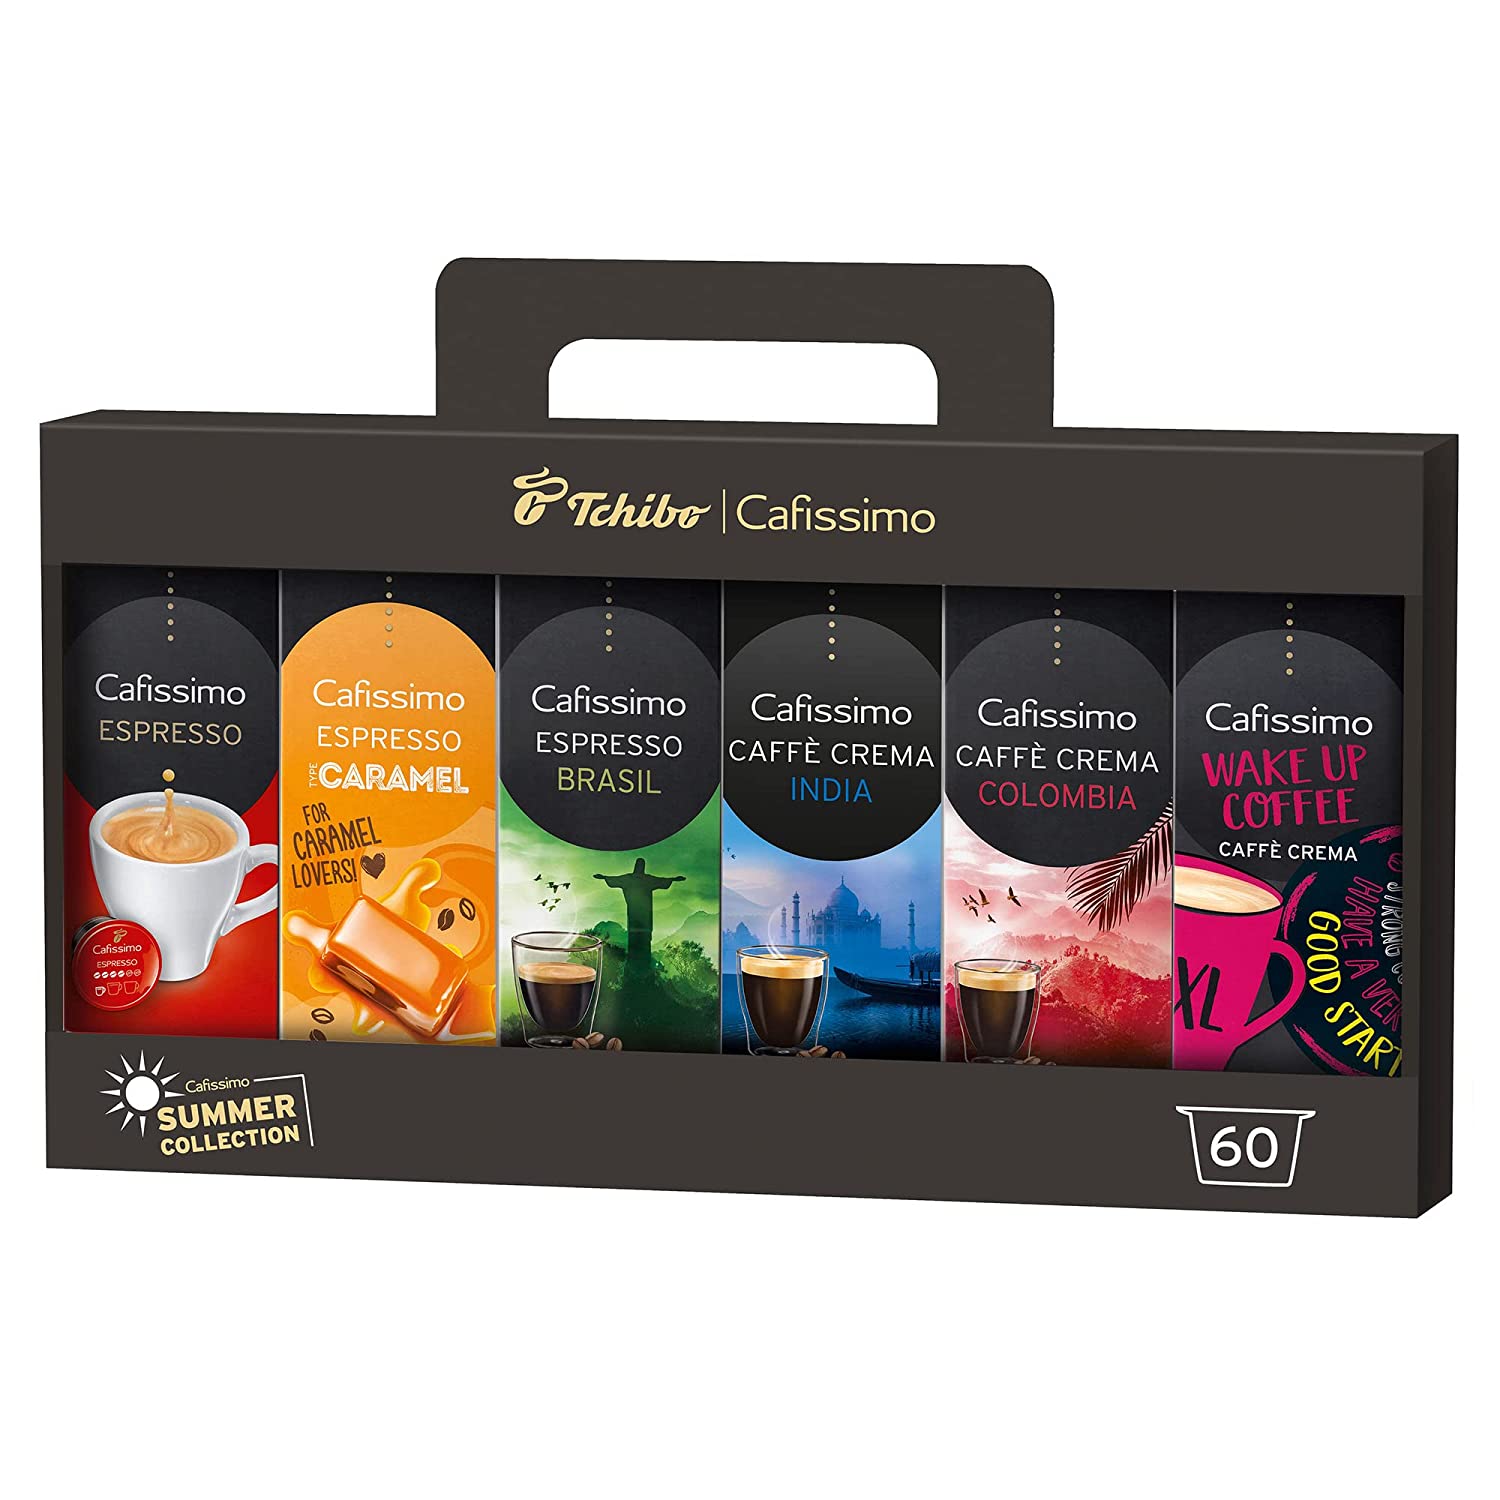 Tchibo Cafissimo Tasting Box Summer Collection different types of caffè Crema, espresso and coffee, 60 pieces (6x10 coffee capsules), capsule case, sustainably & fairly traded